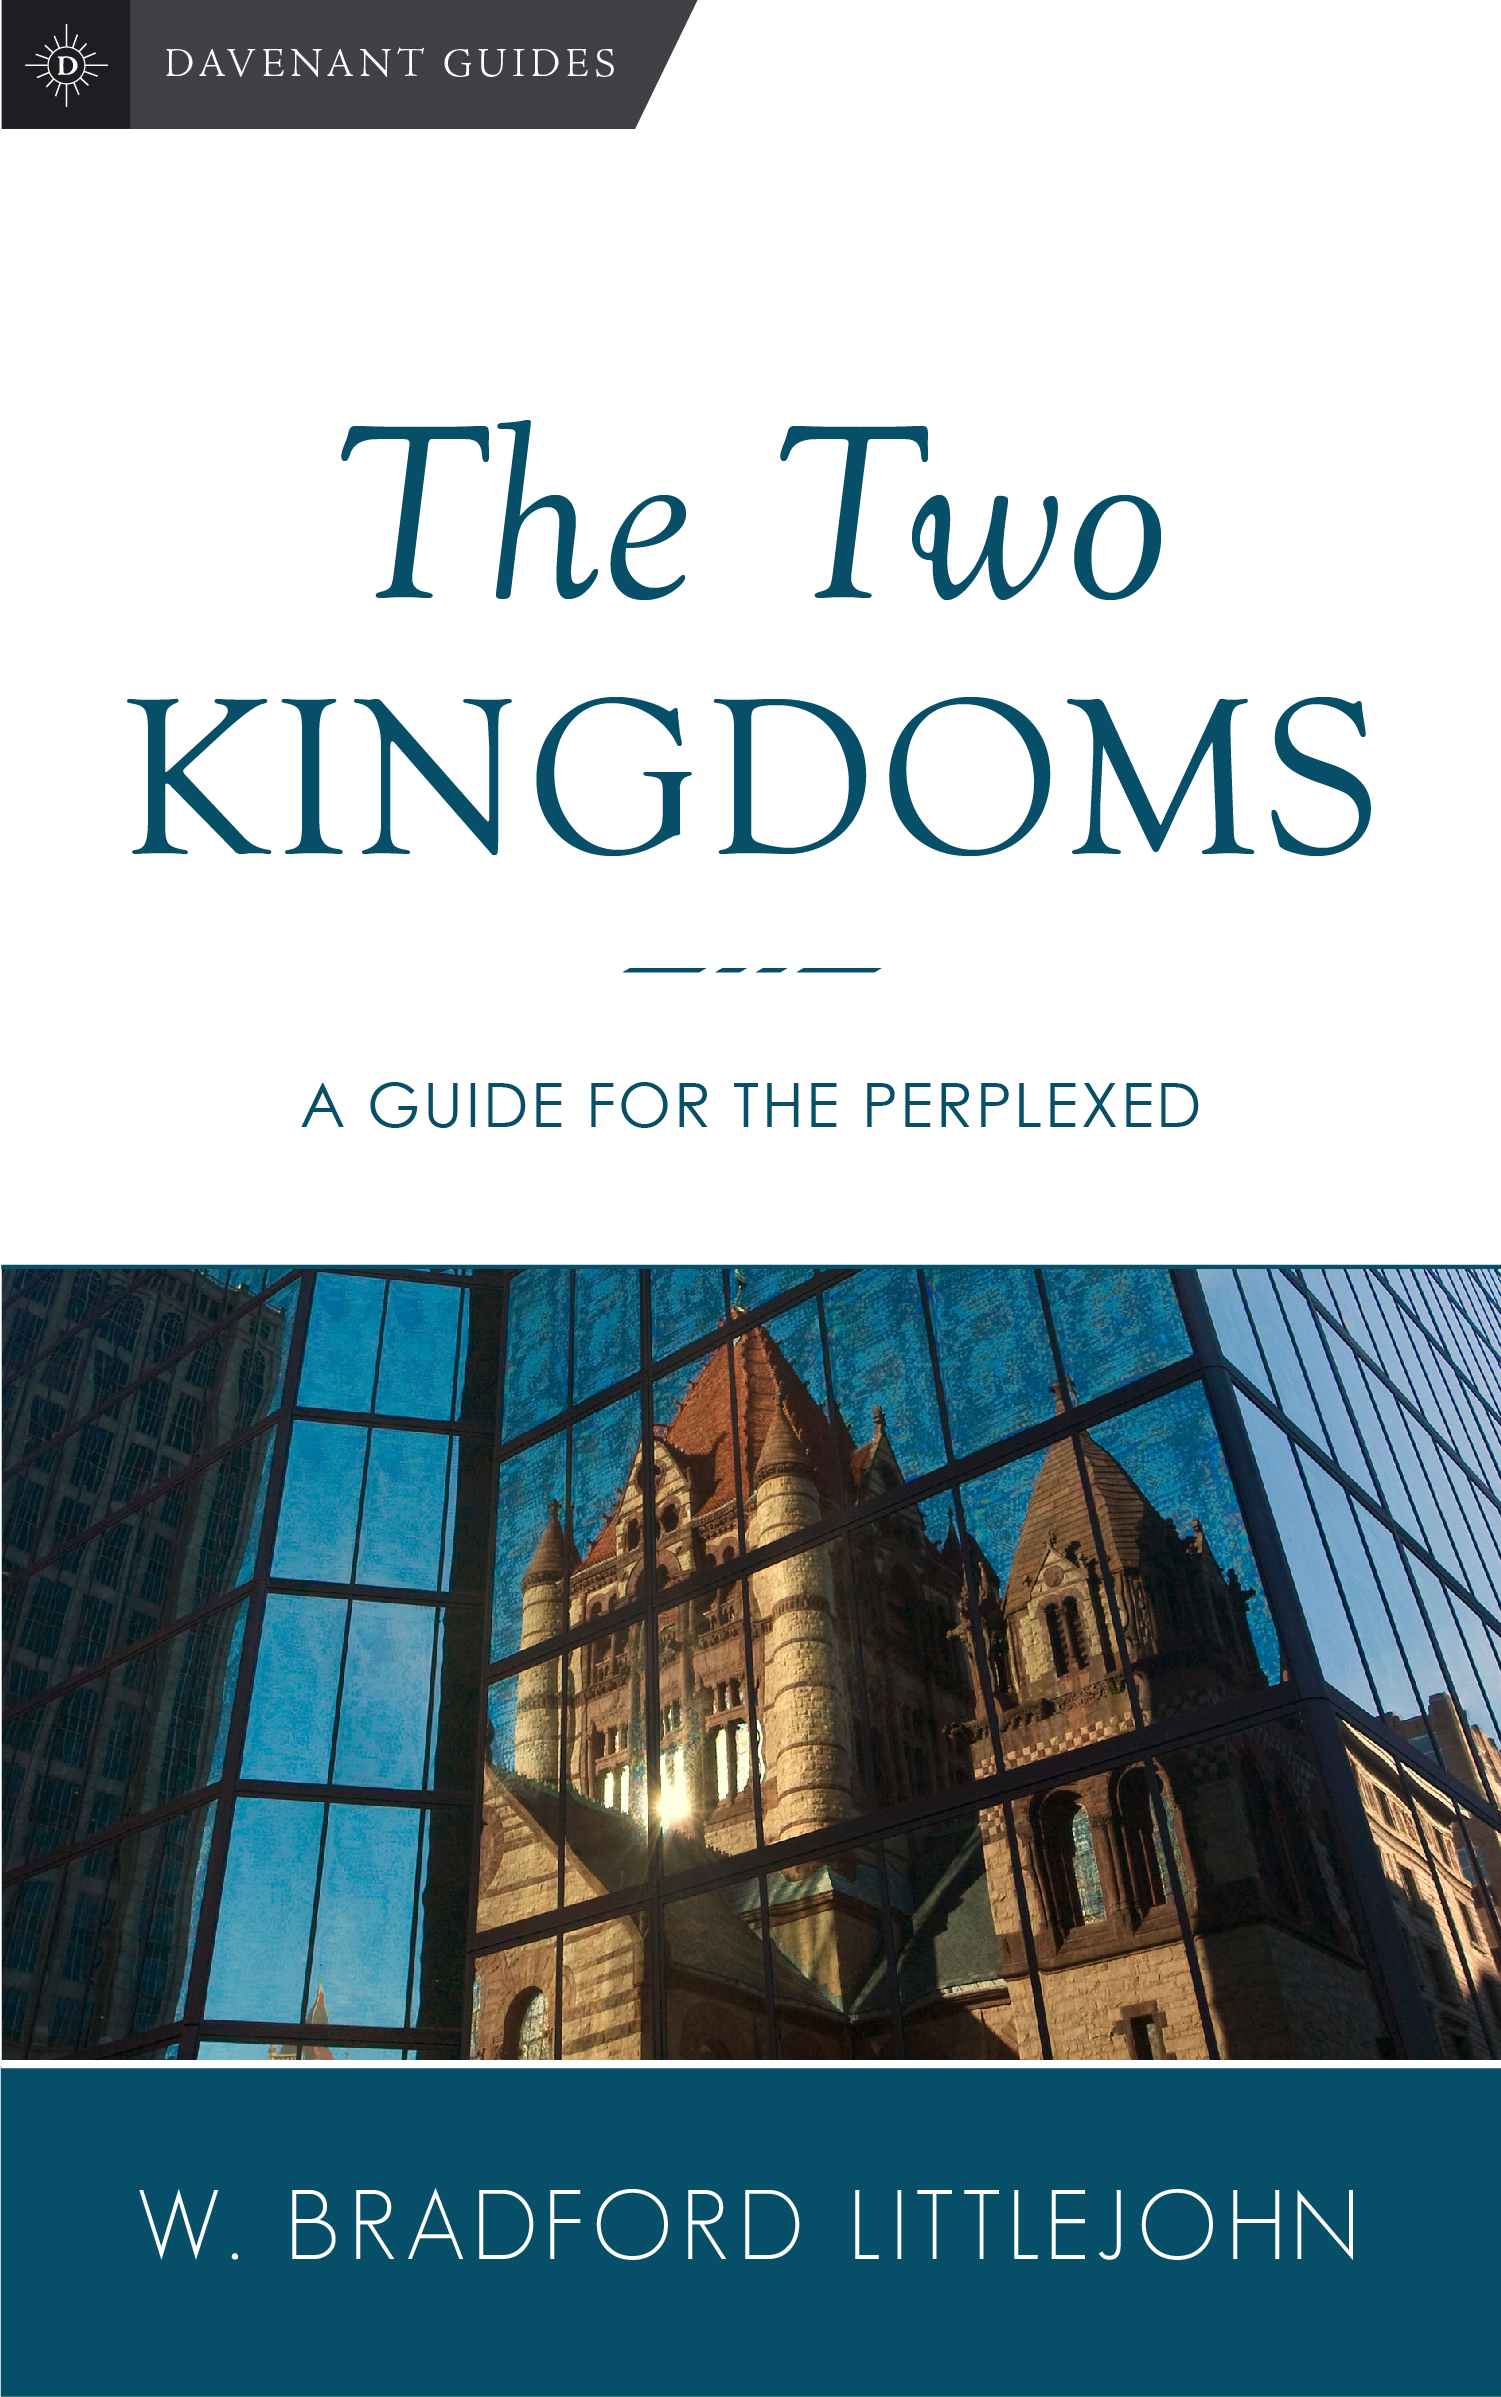 The Two Kingdoms: A Guide for the Perplexed